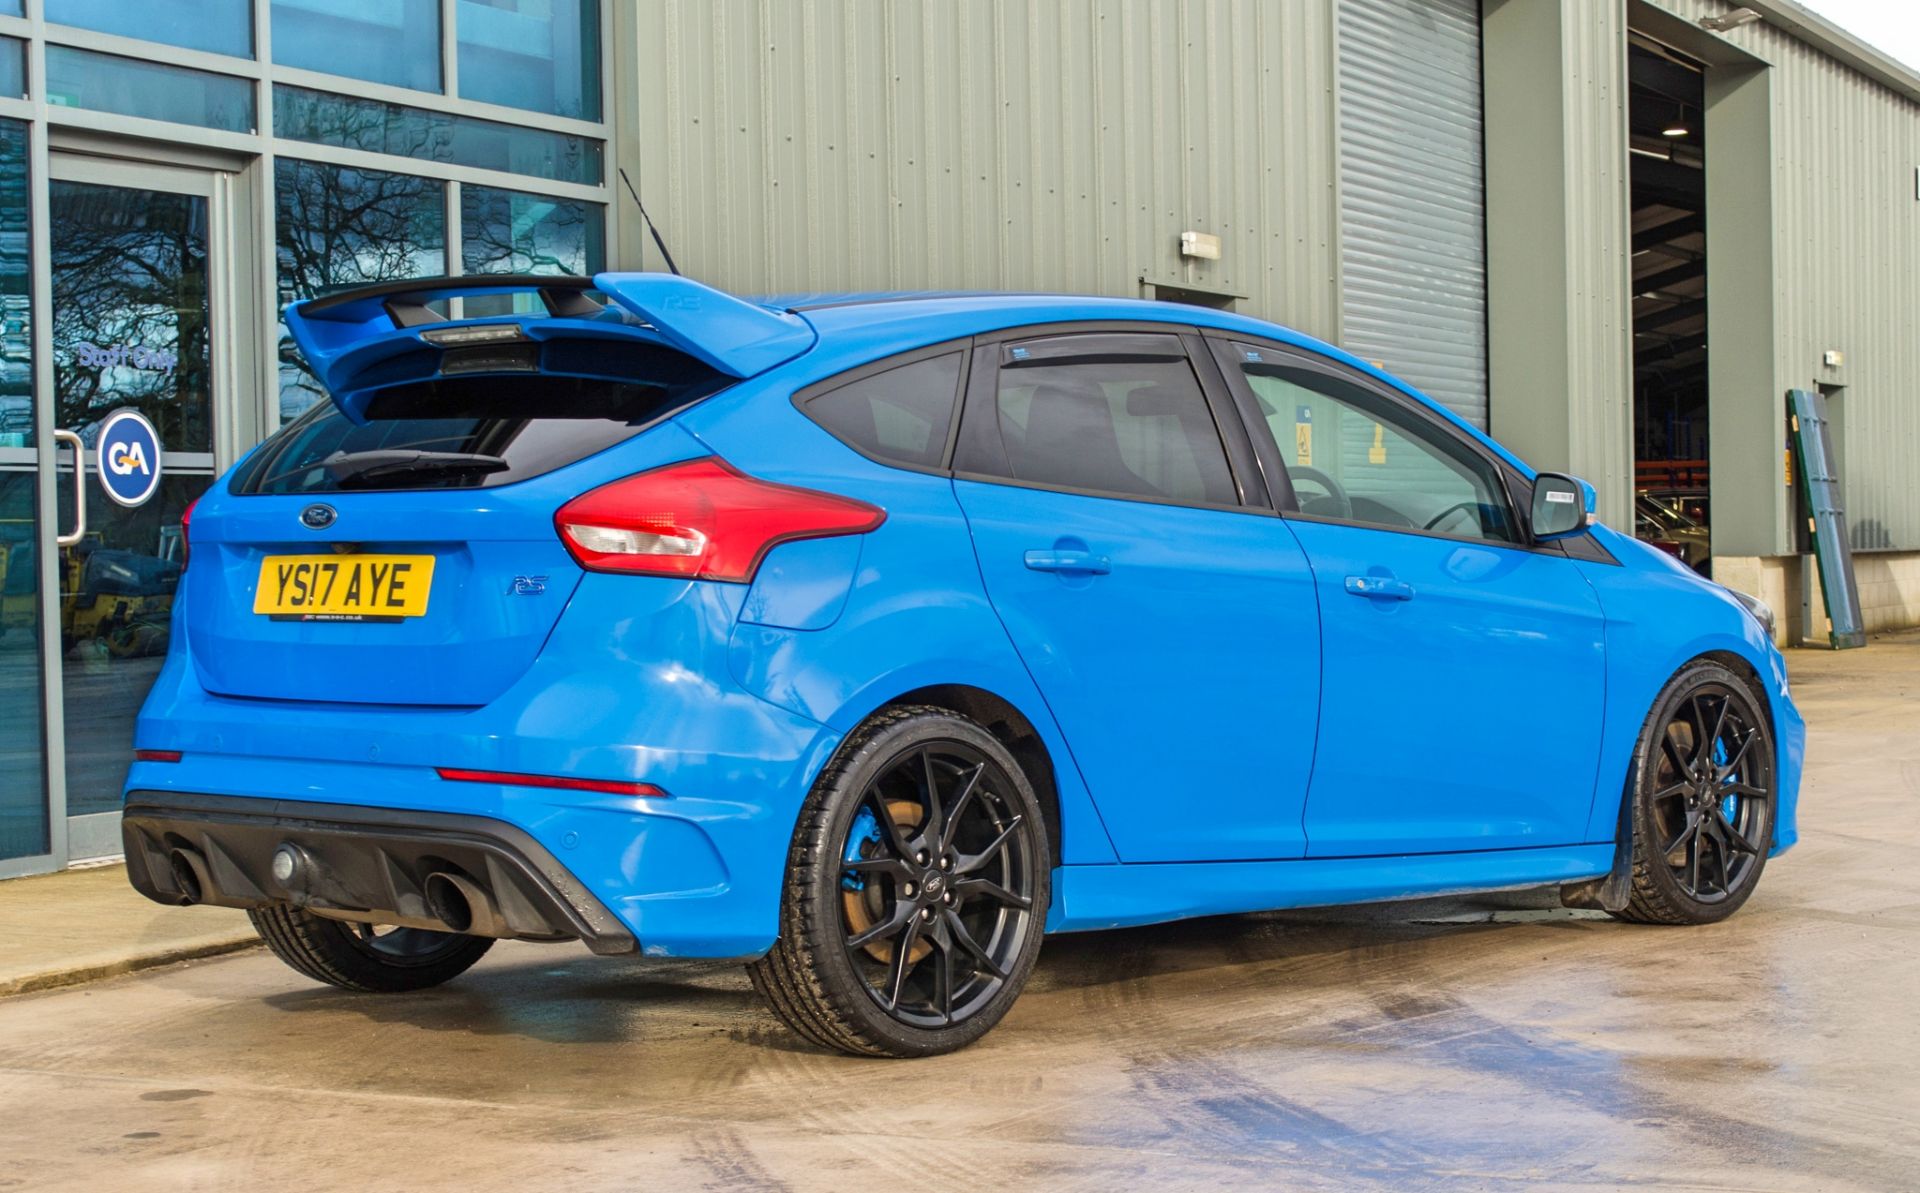 2017 Ford Focus 2.3 RS 5 door hatch back - Image 5 of 56